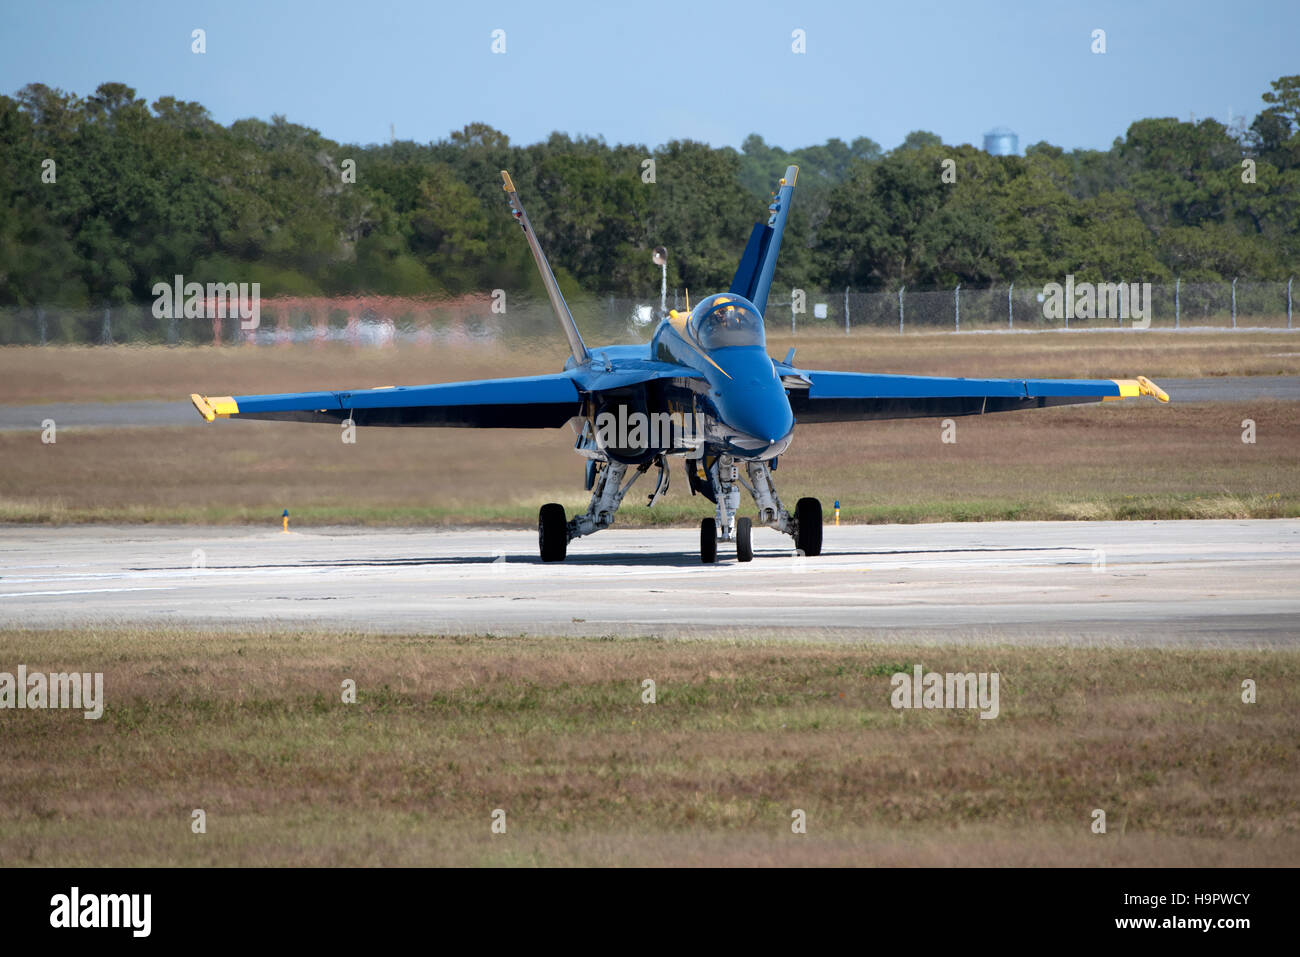 Military Hornet fighter jet preparing for take of from a runway at Pensacola Florida USA - October 2016 Stock Photo